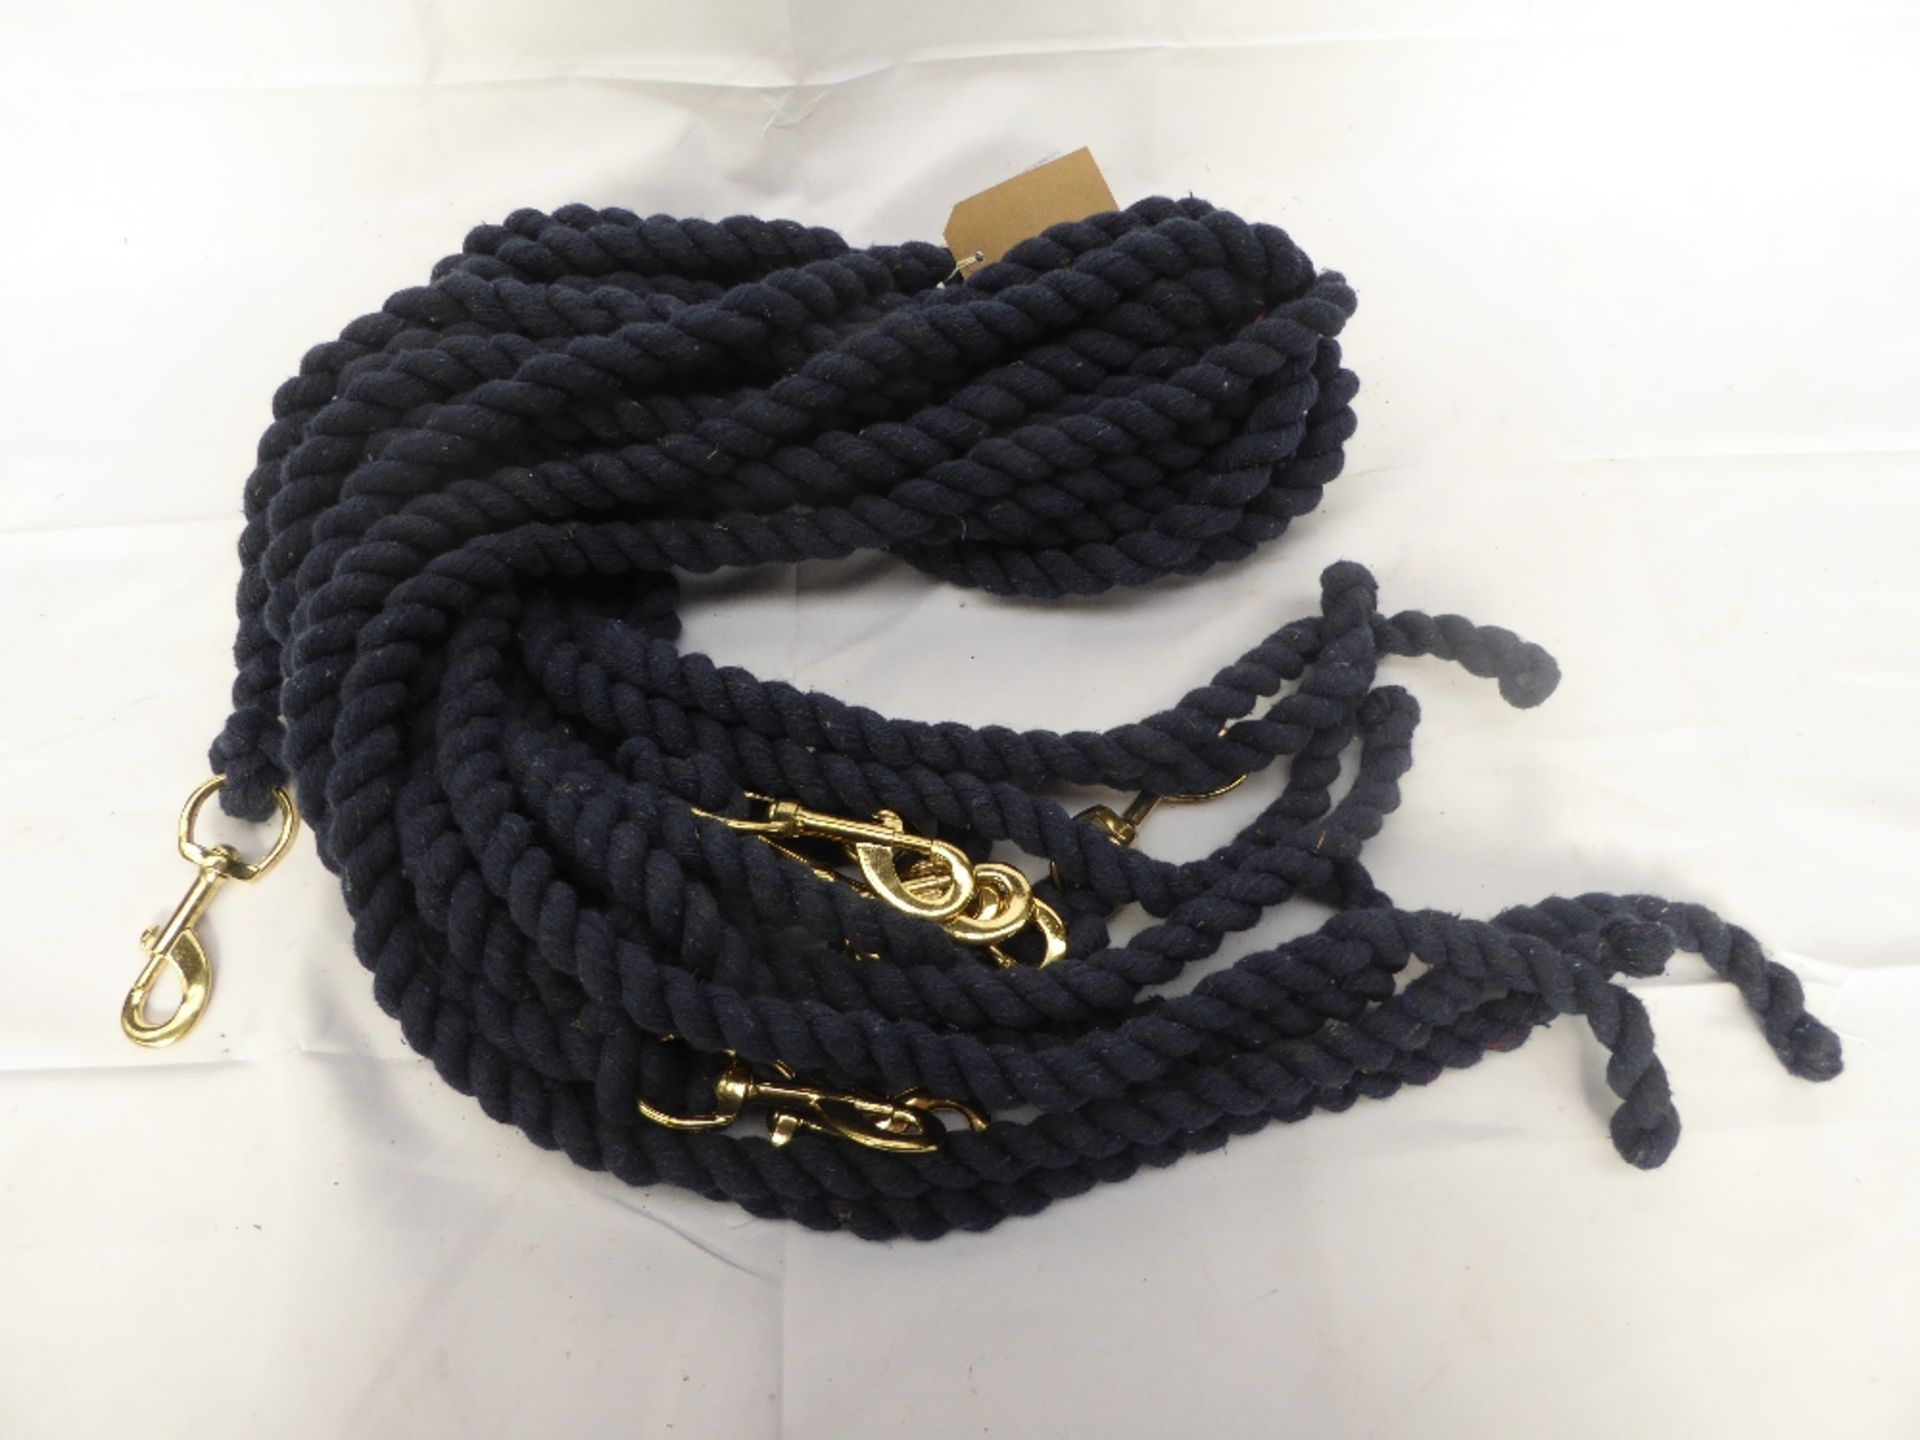 10 x lead ropes - carries VAT